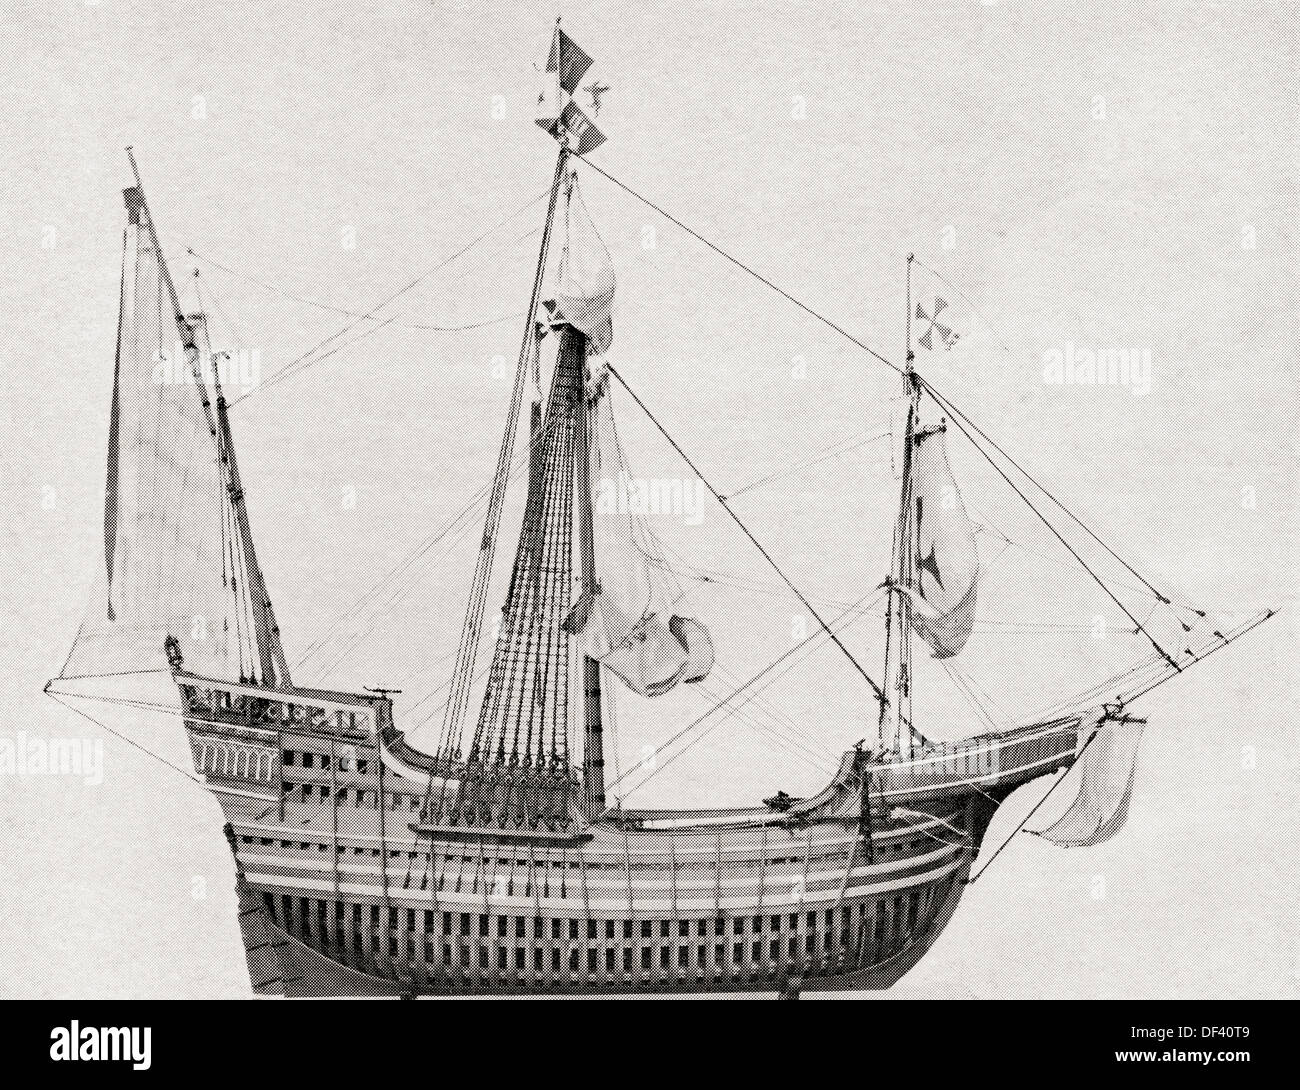 The Santa Maria, flagship of the squadron of three vessels commanded by Christopher Columbus in 1492. Stock Photo